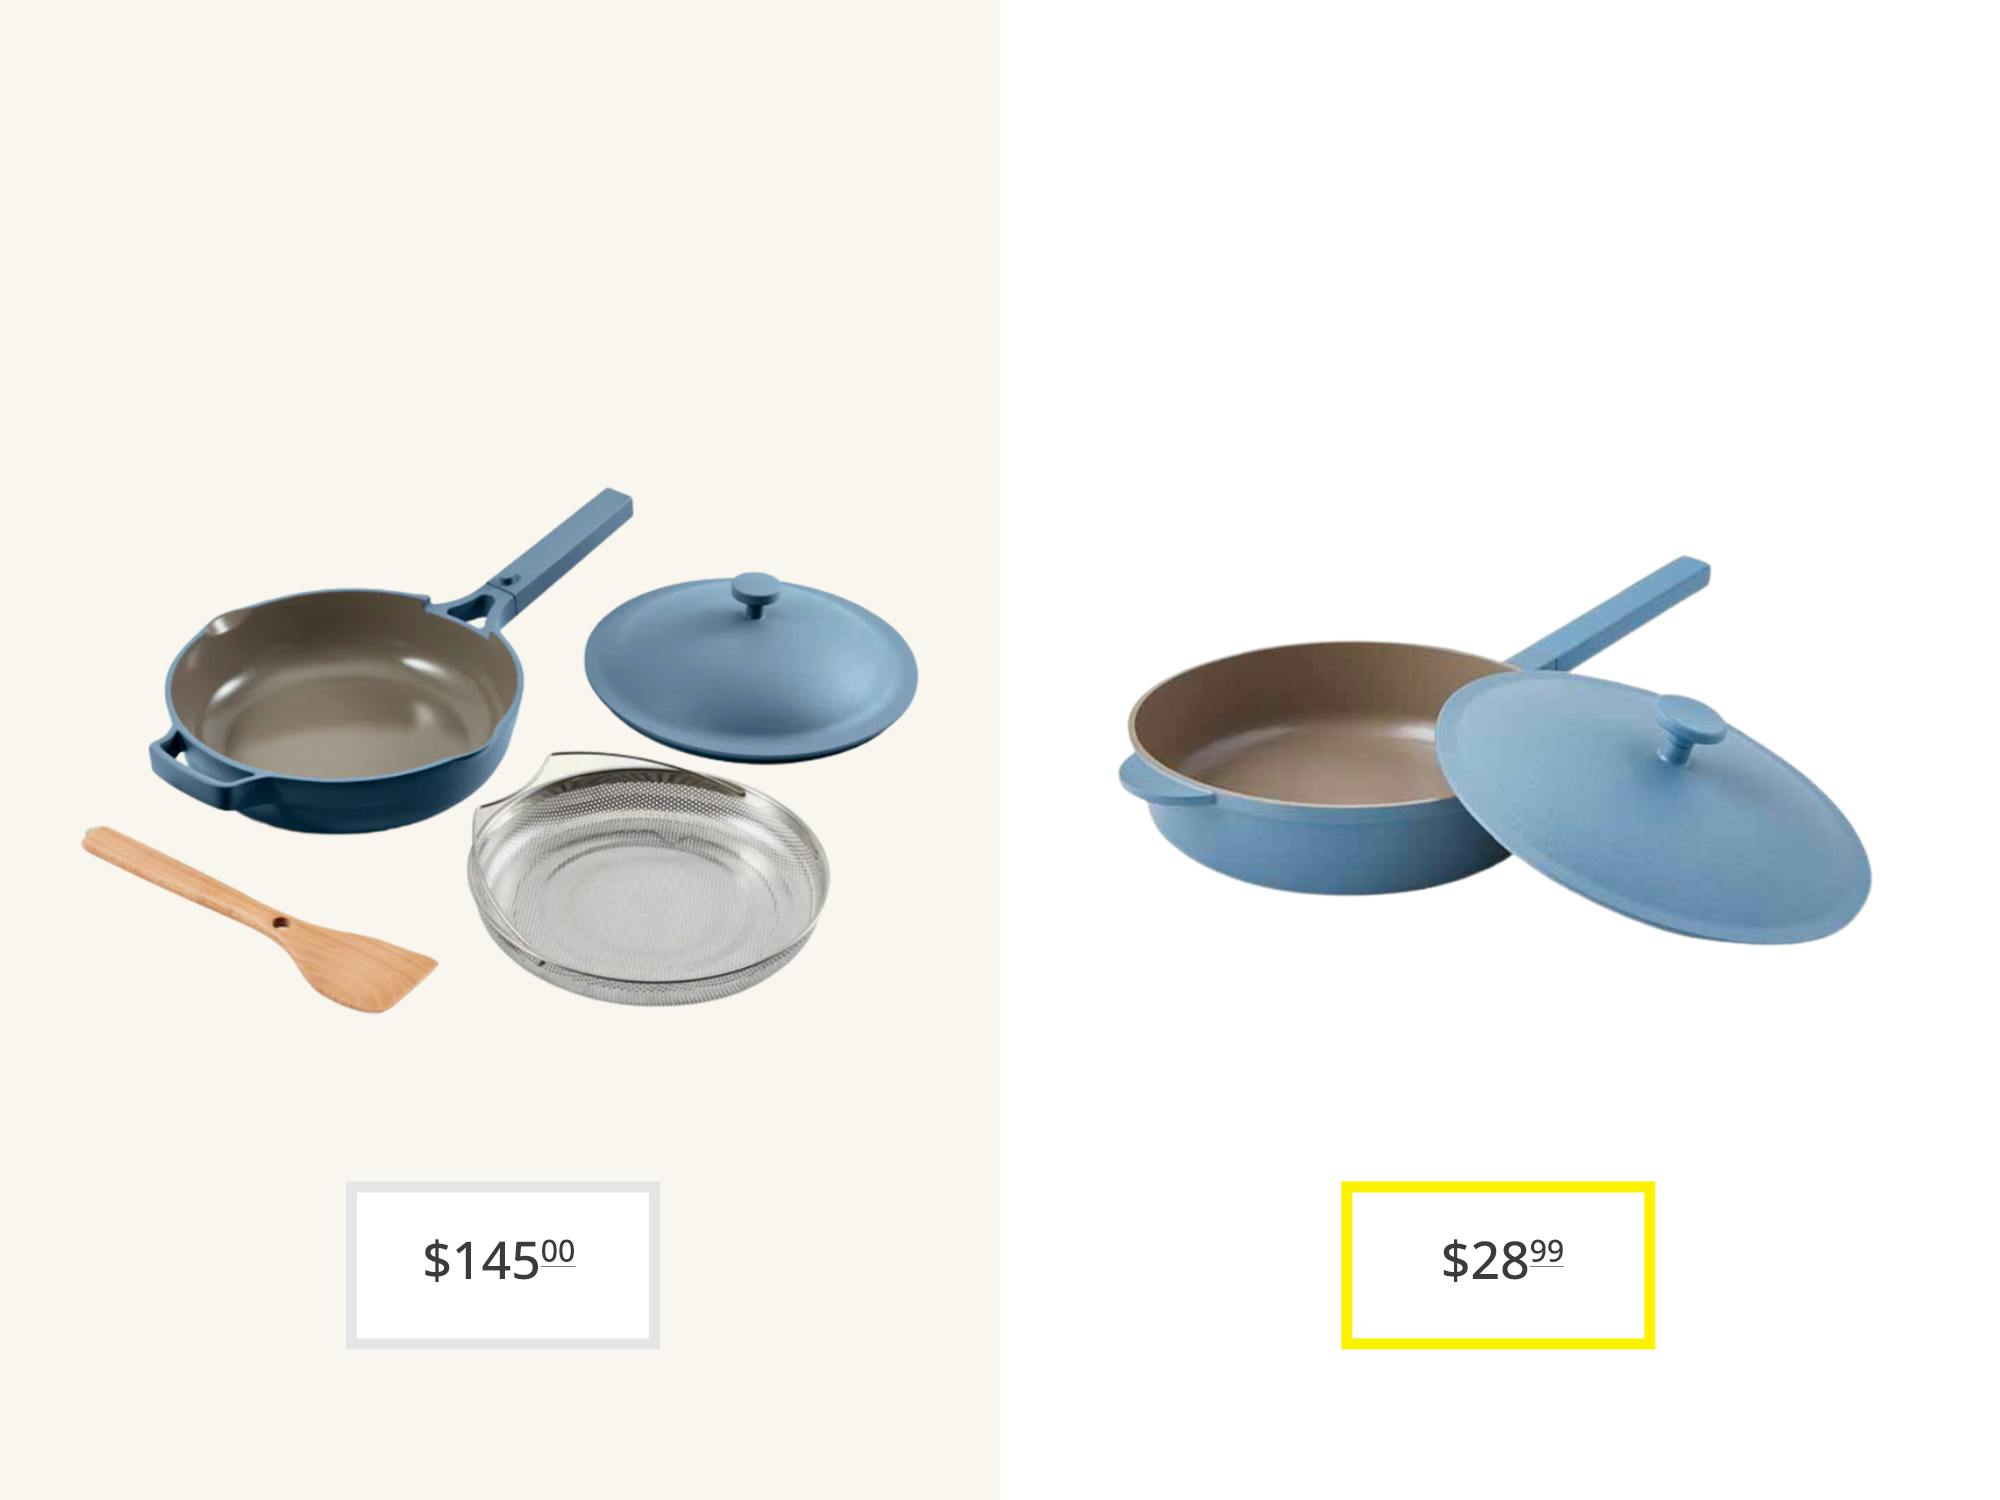 The Always Pan compared to The Awesome Pan from Aldi